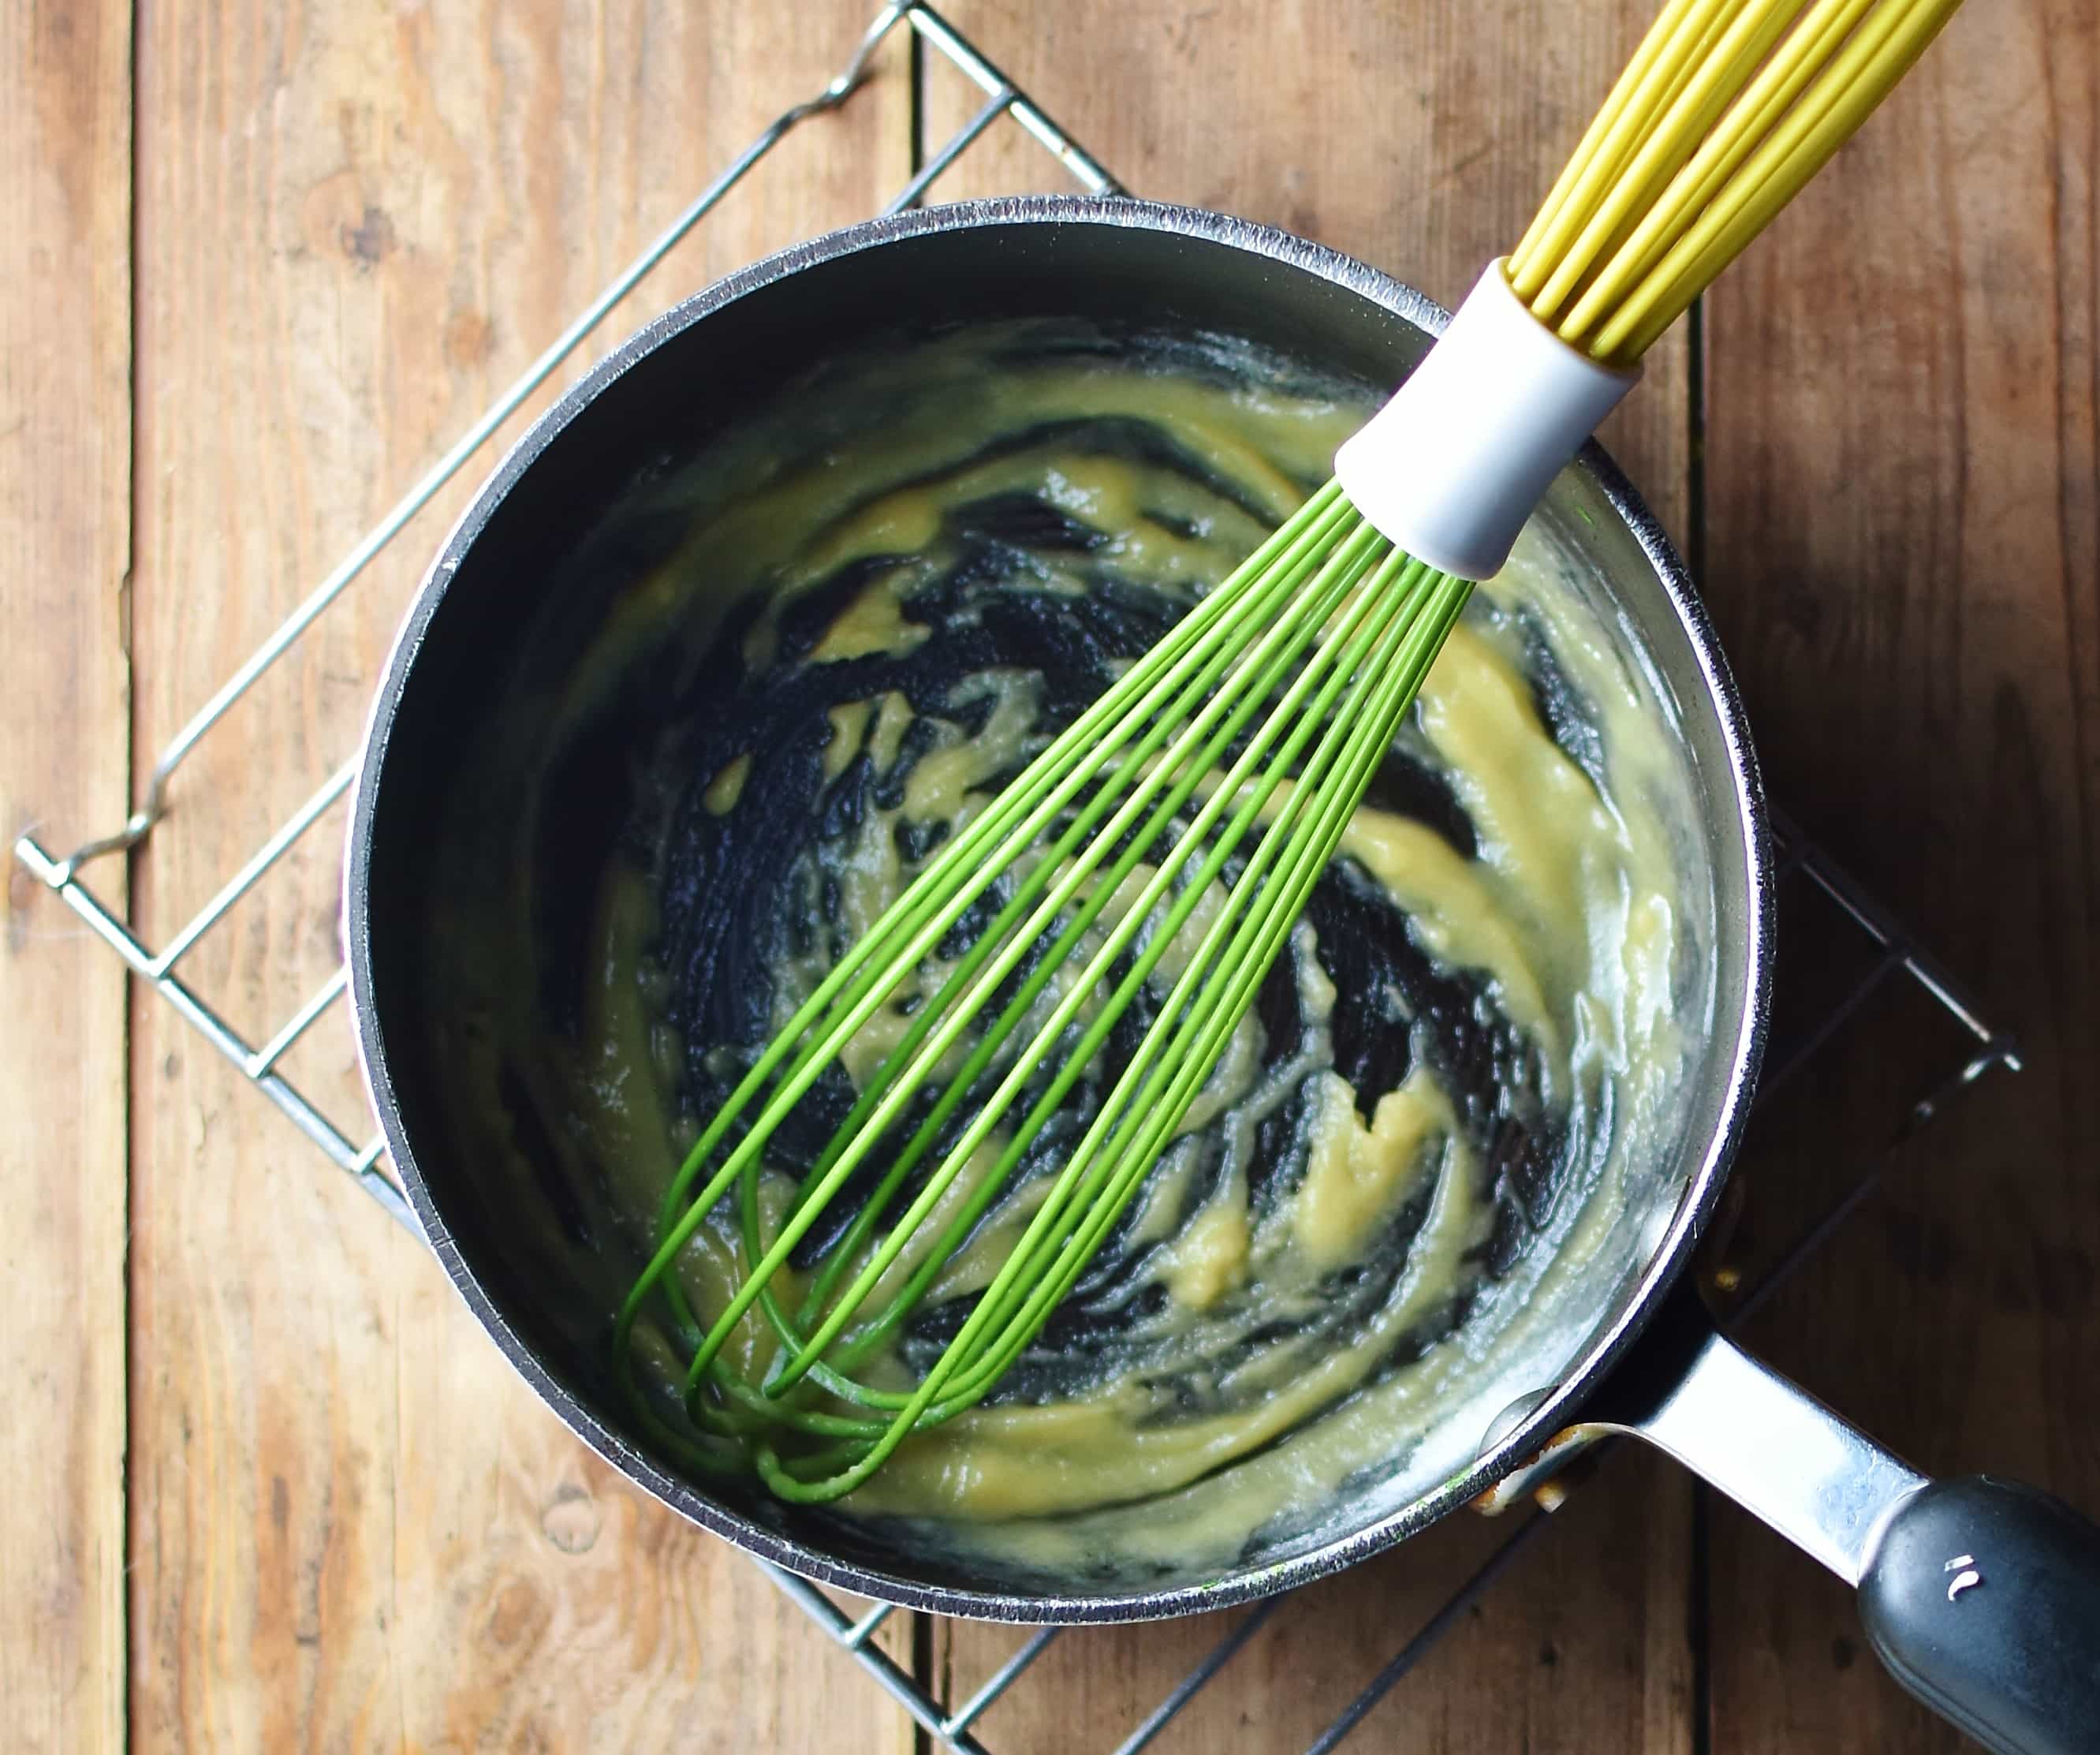 Roux in large pot with green whisk.